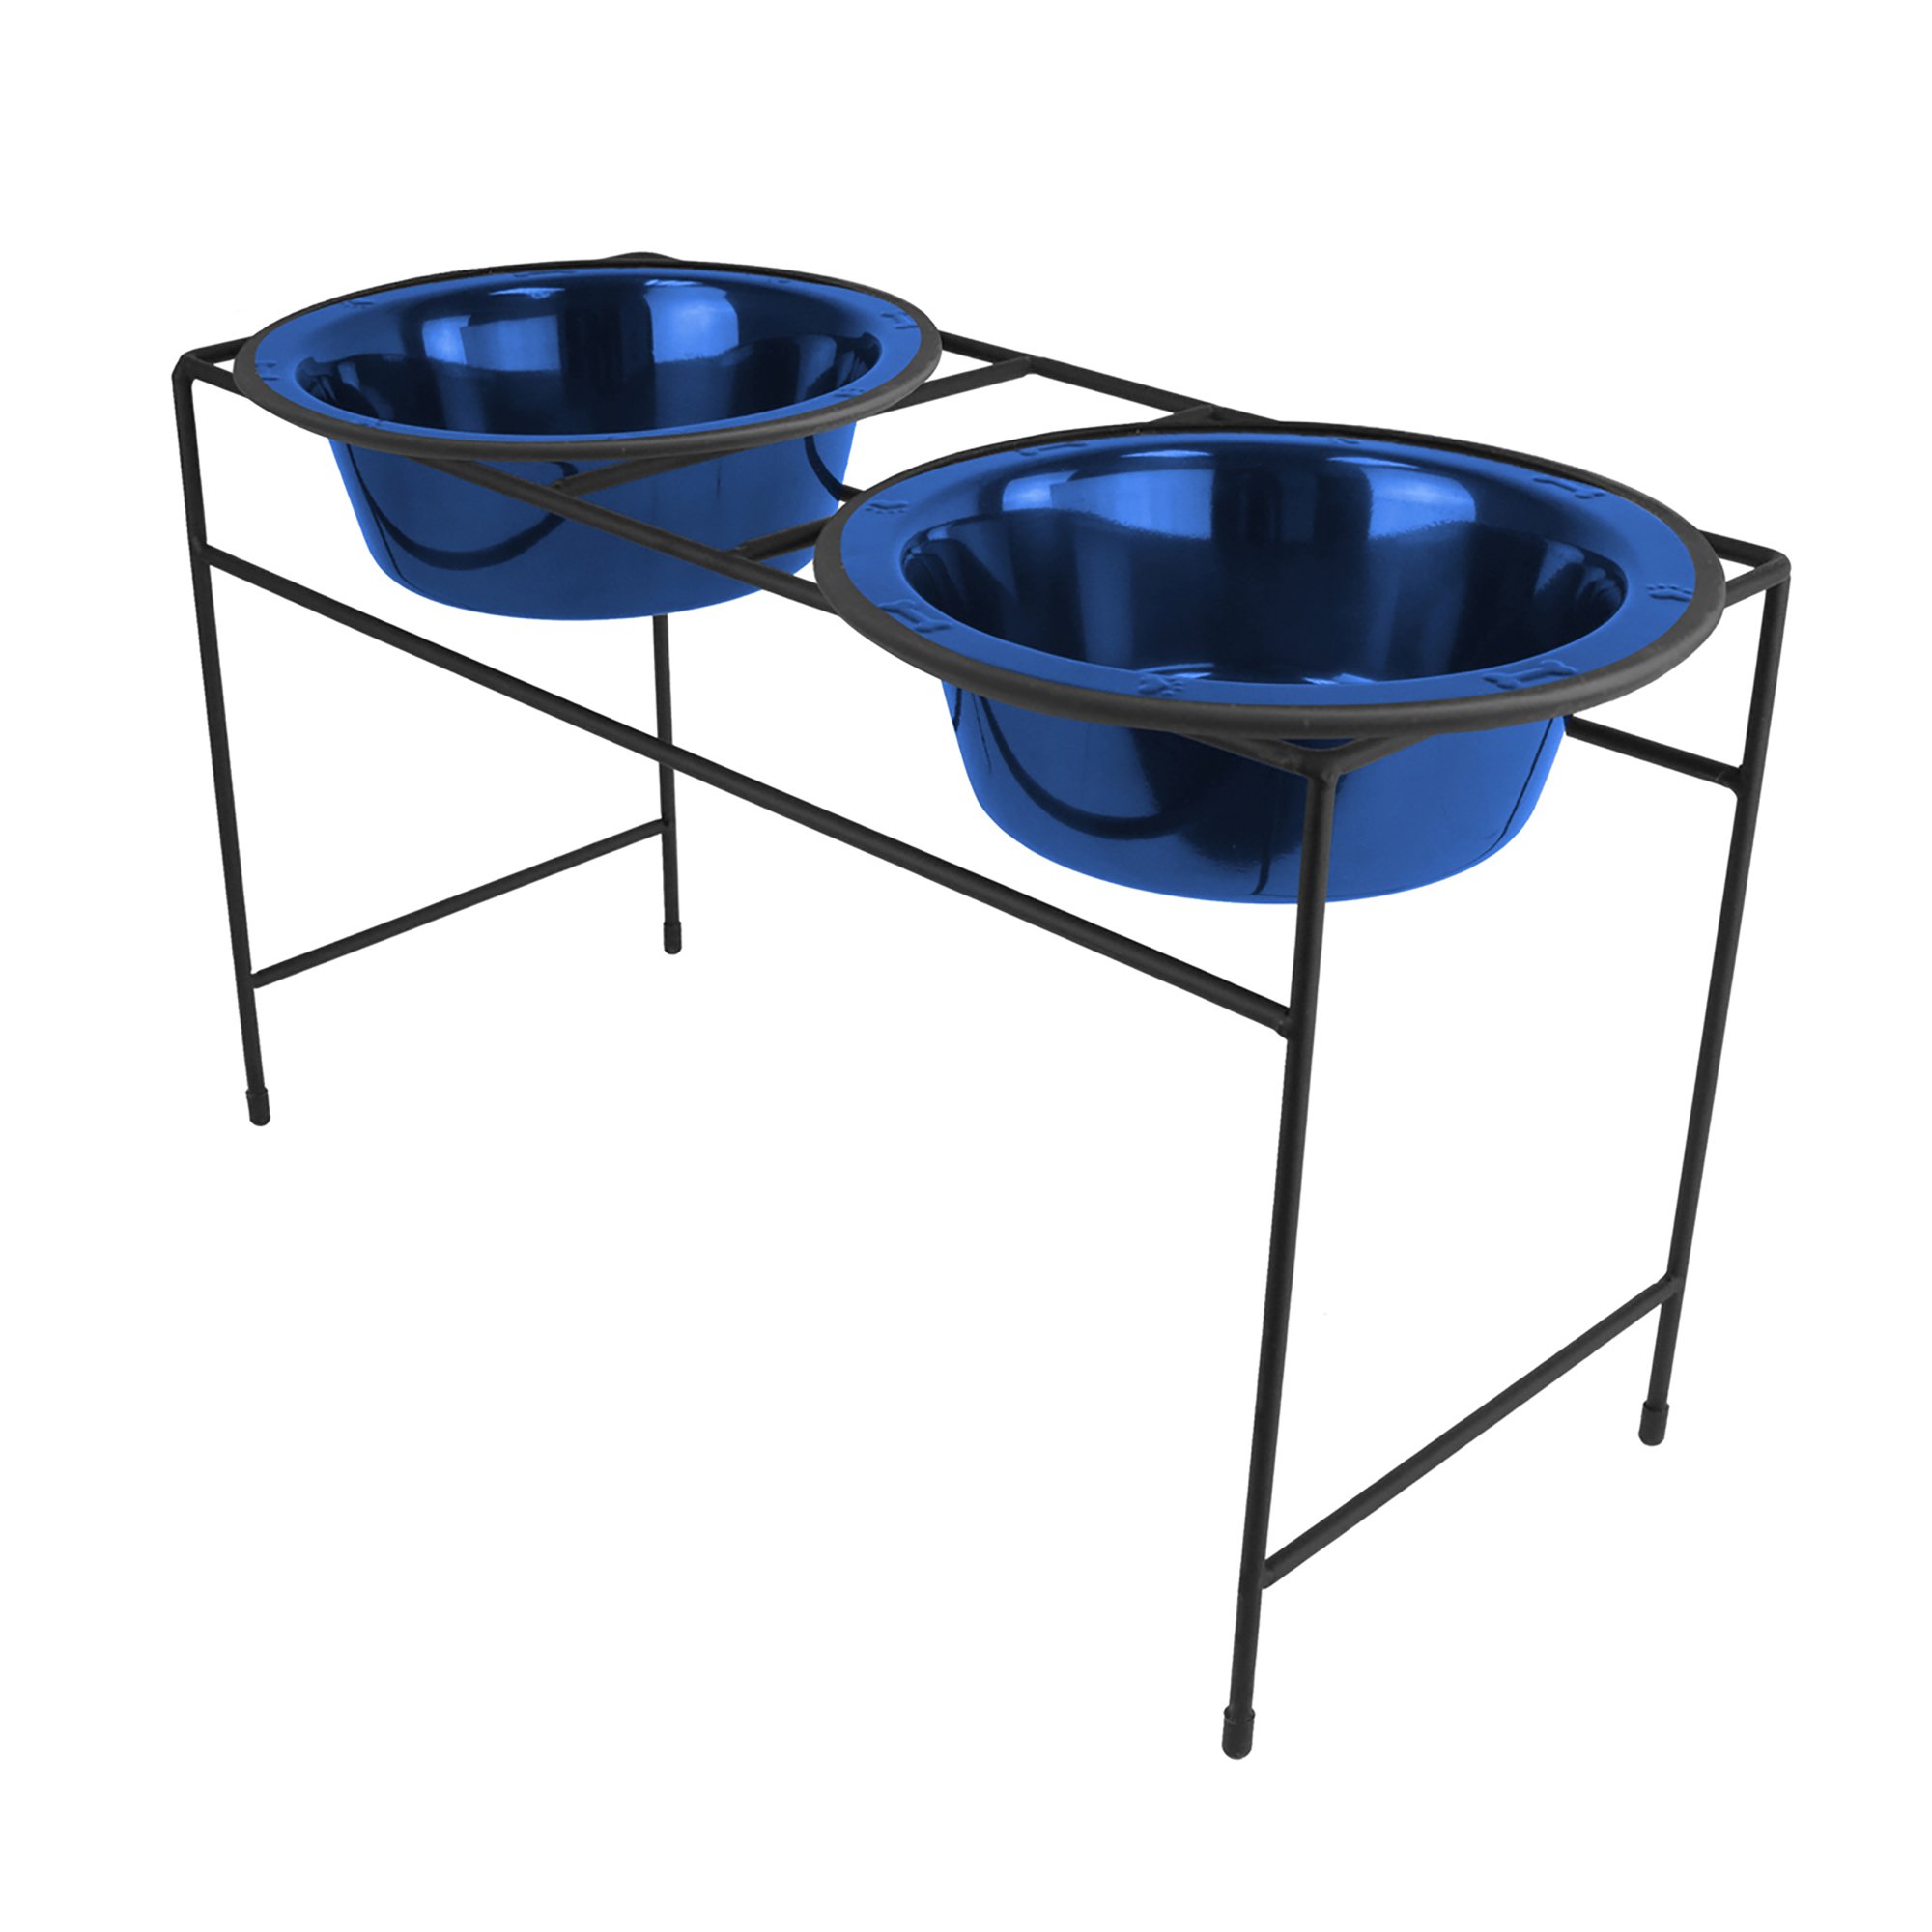 Platinum Pets Modern Double Diner Feeder With Stainless Steel Catdog Bowl, Large, Sapphire Blue